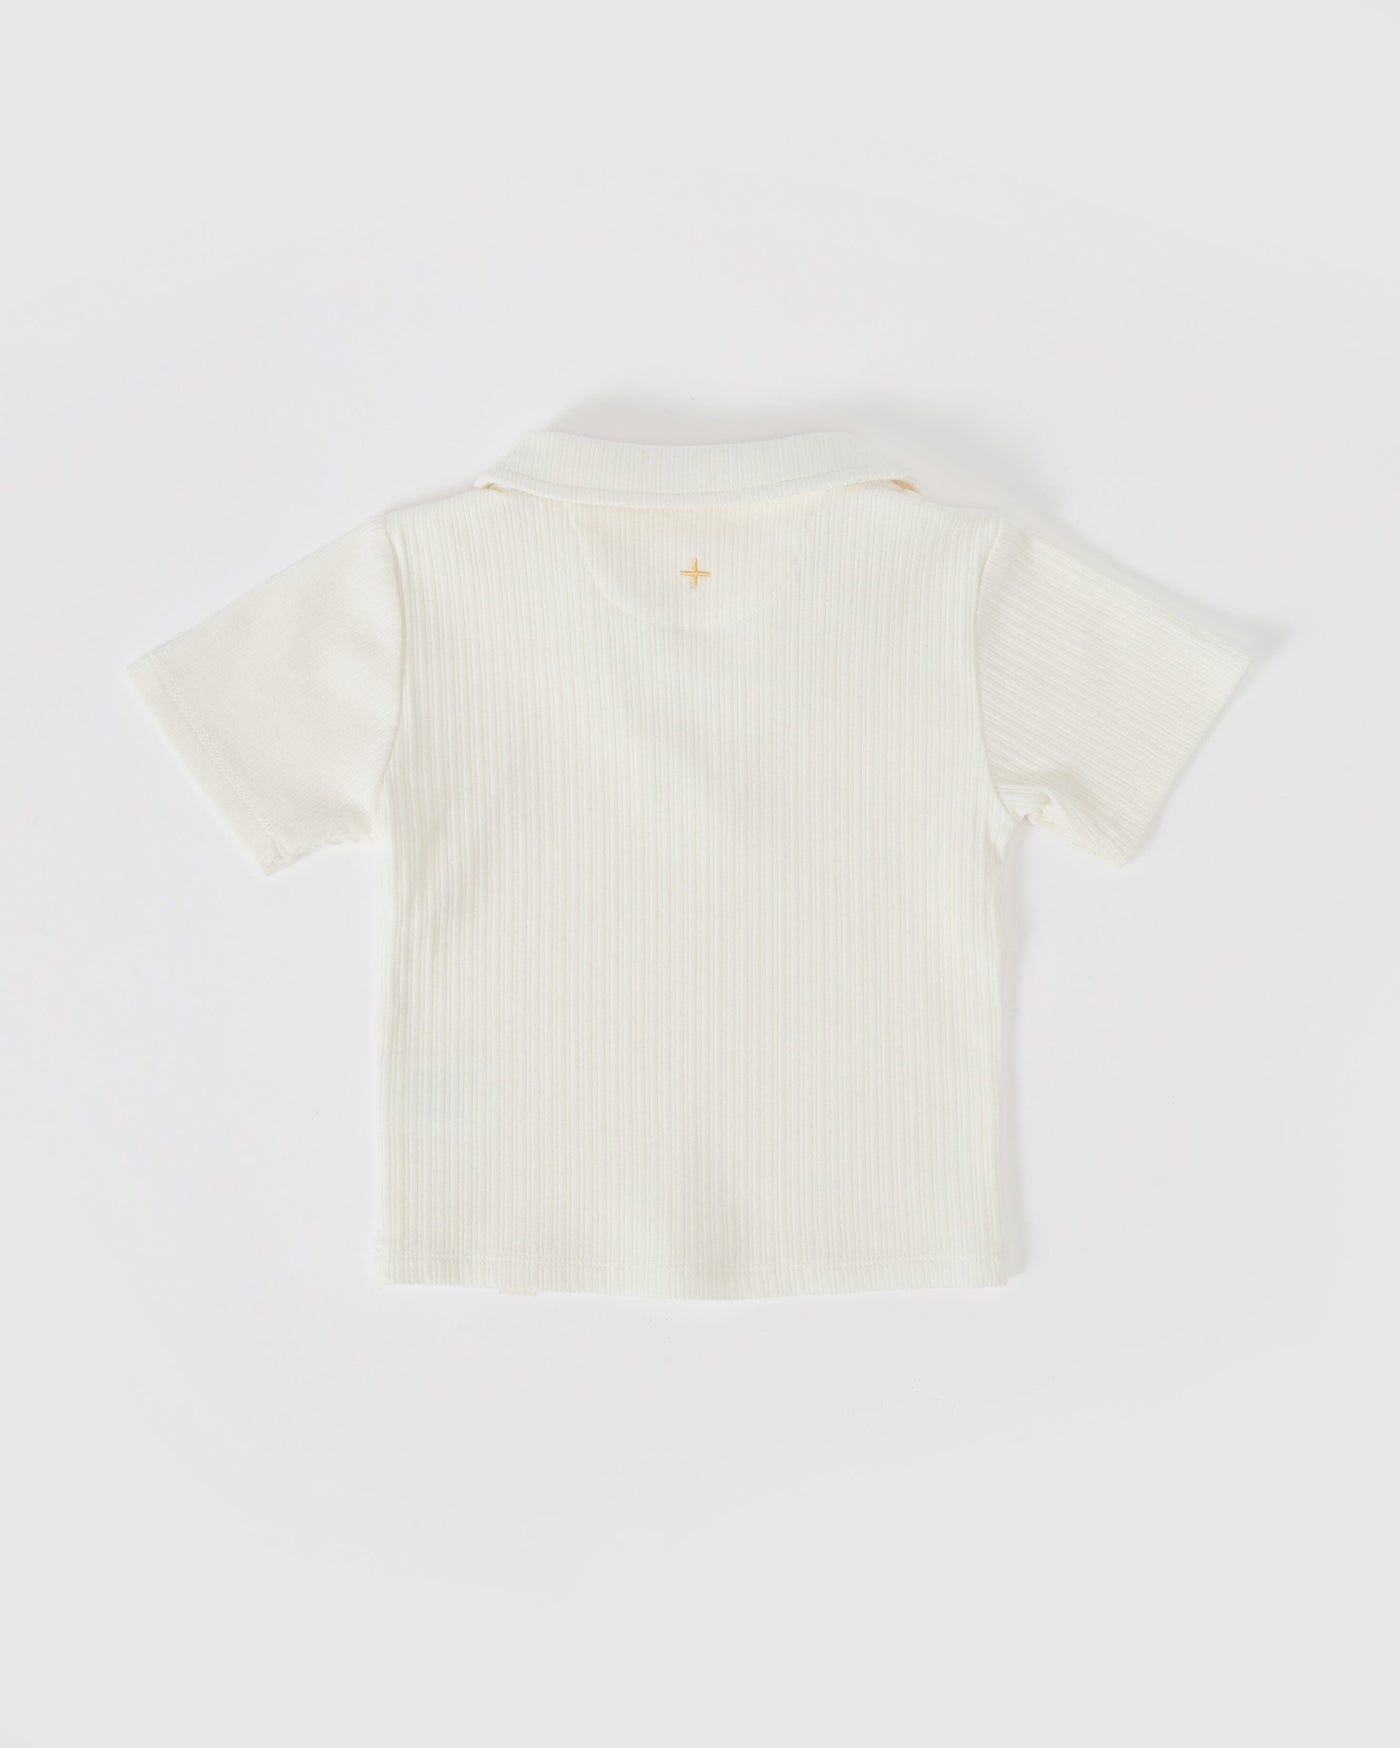 Goldie & Ace Pia Collared T-Shirt - Ivory Short Sleeve T-Shirt Goldie & Ace 